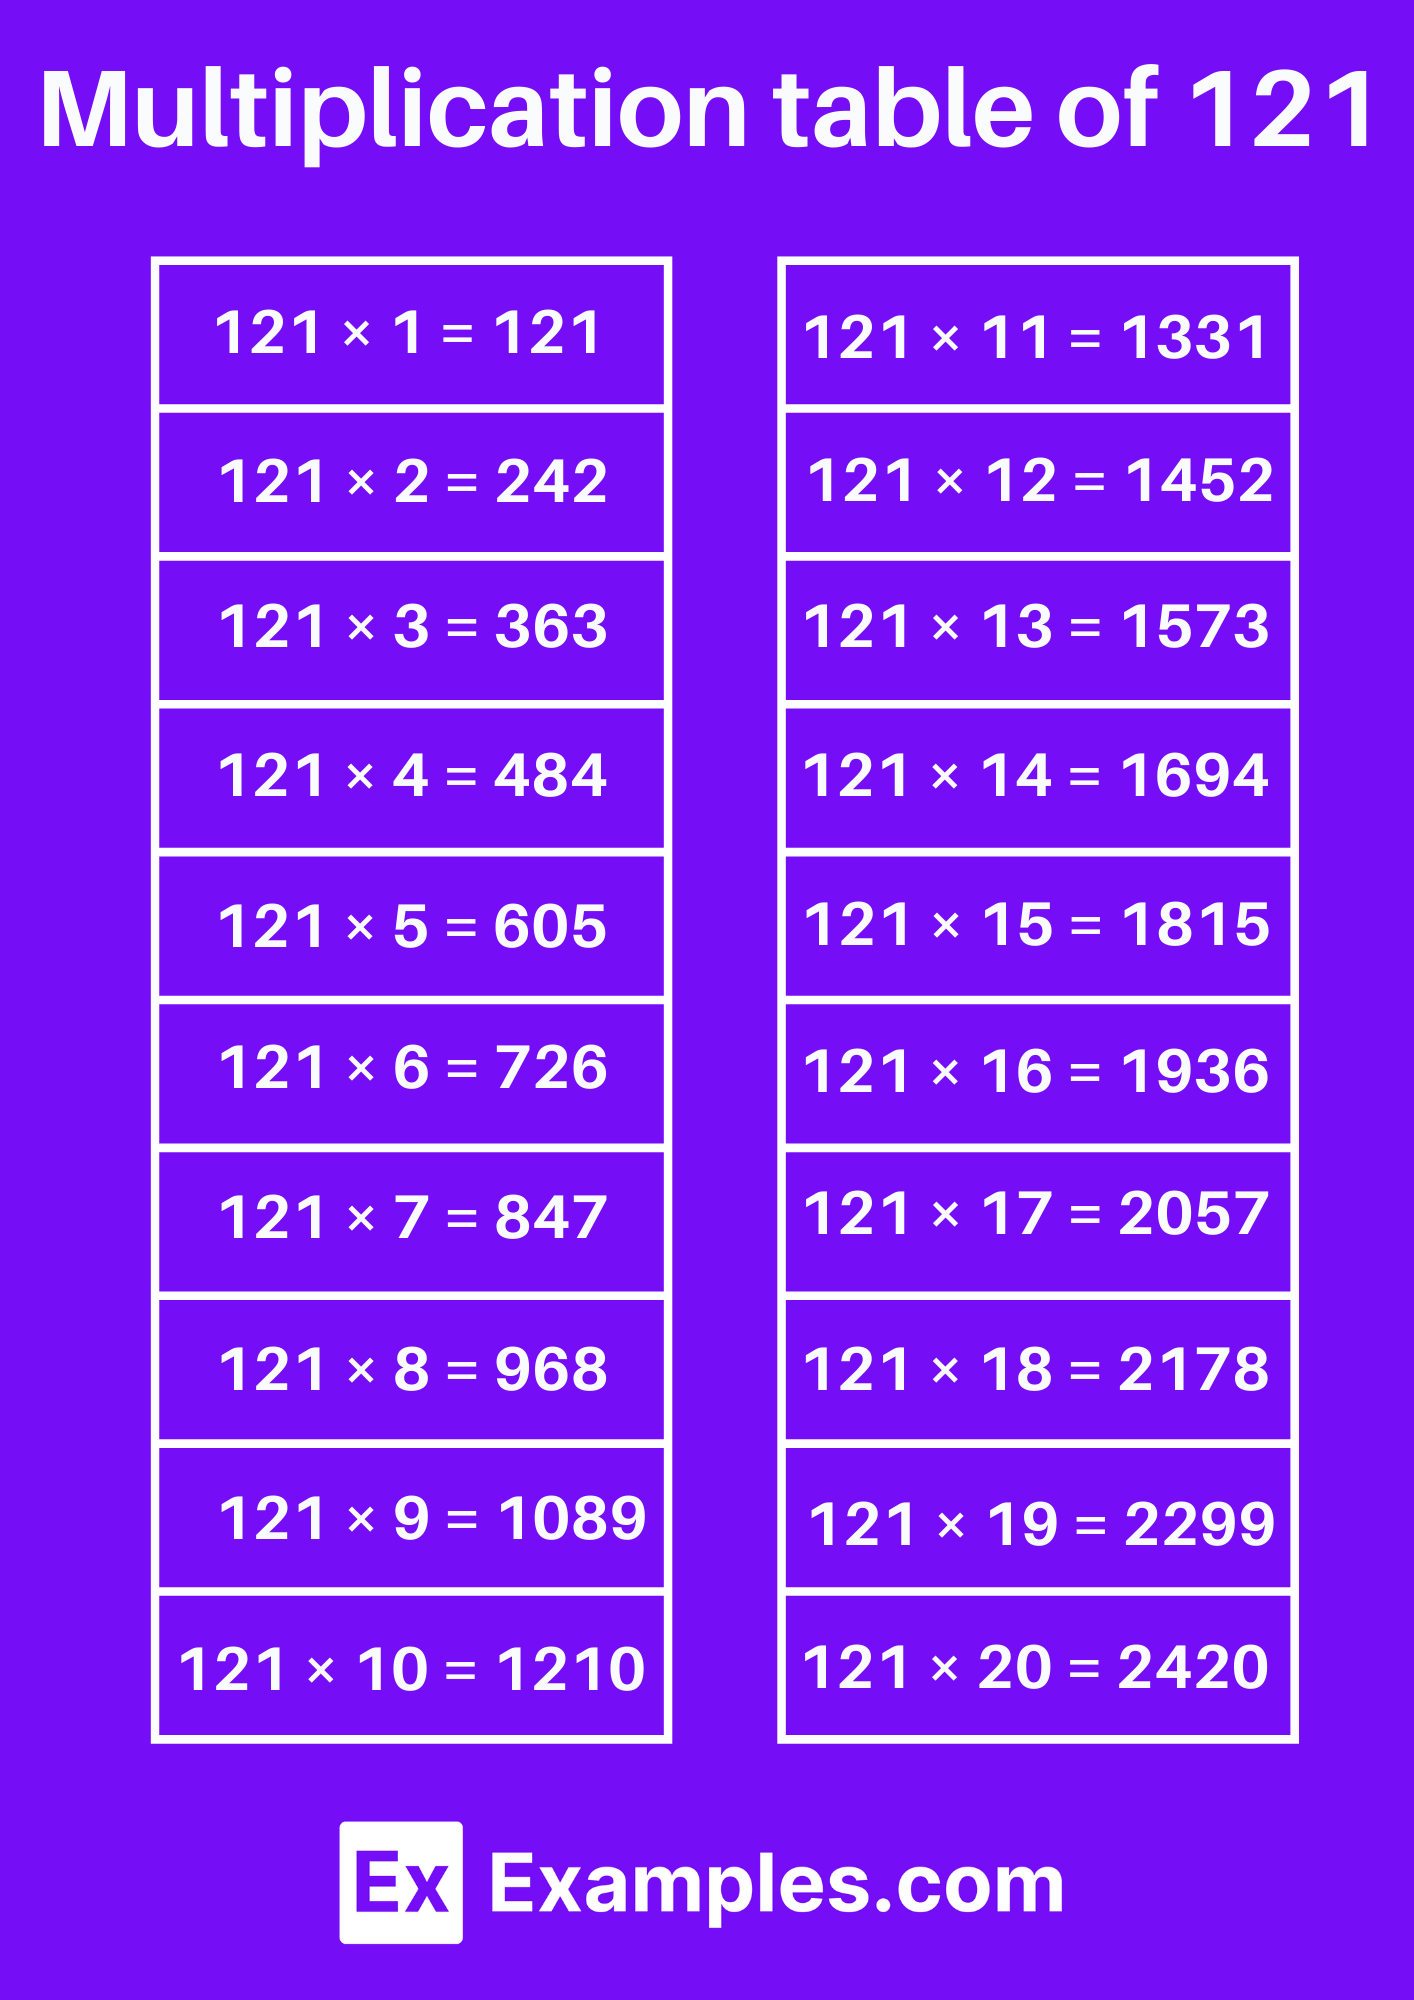 Multiplication-table-of-121